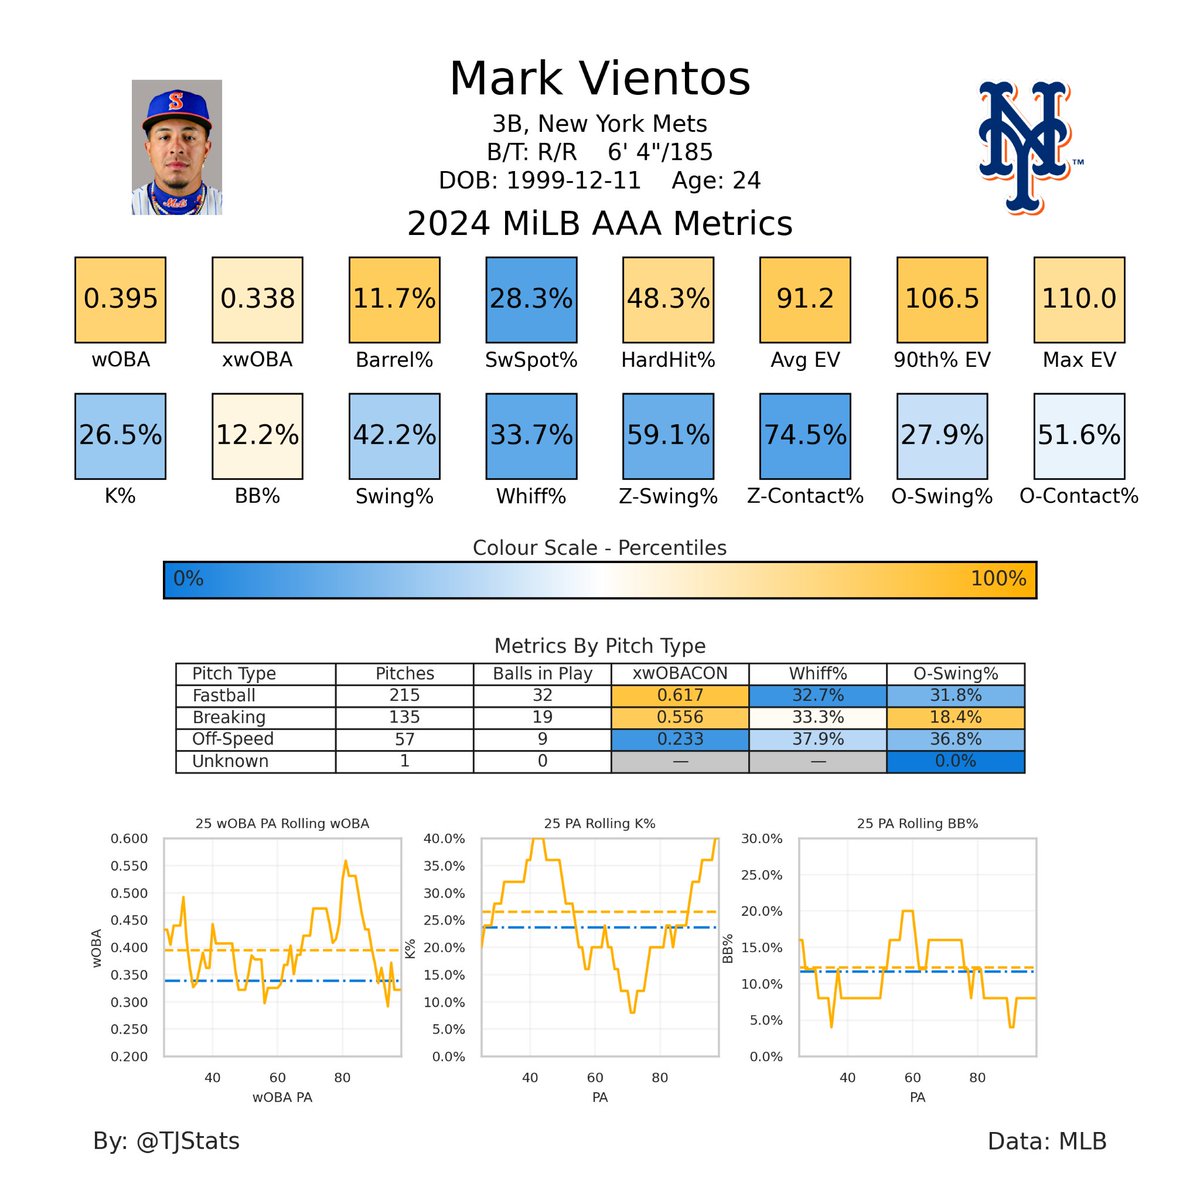 Mark Vientos has been productive in AAA this season as he is displaying power He dropped his K% from 2023, but his underlying contact metrics are poor, which are not encouraging The power is real, but the plate discipline issues are a concern. Hopefully he can make it work.